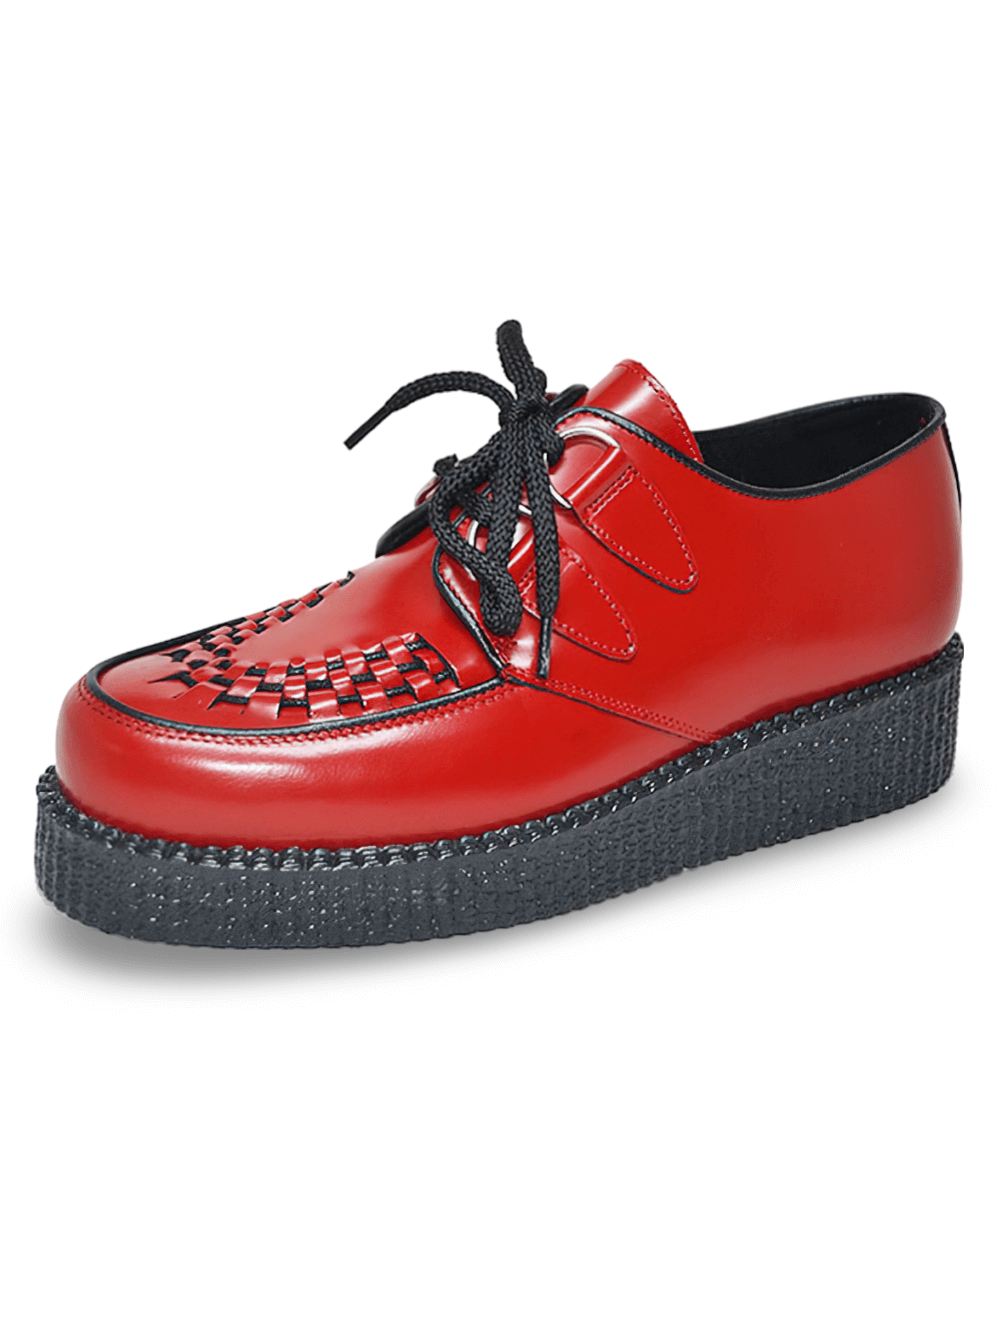 Unisex Box Leather Creepers with Round Toe Design